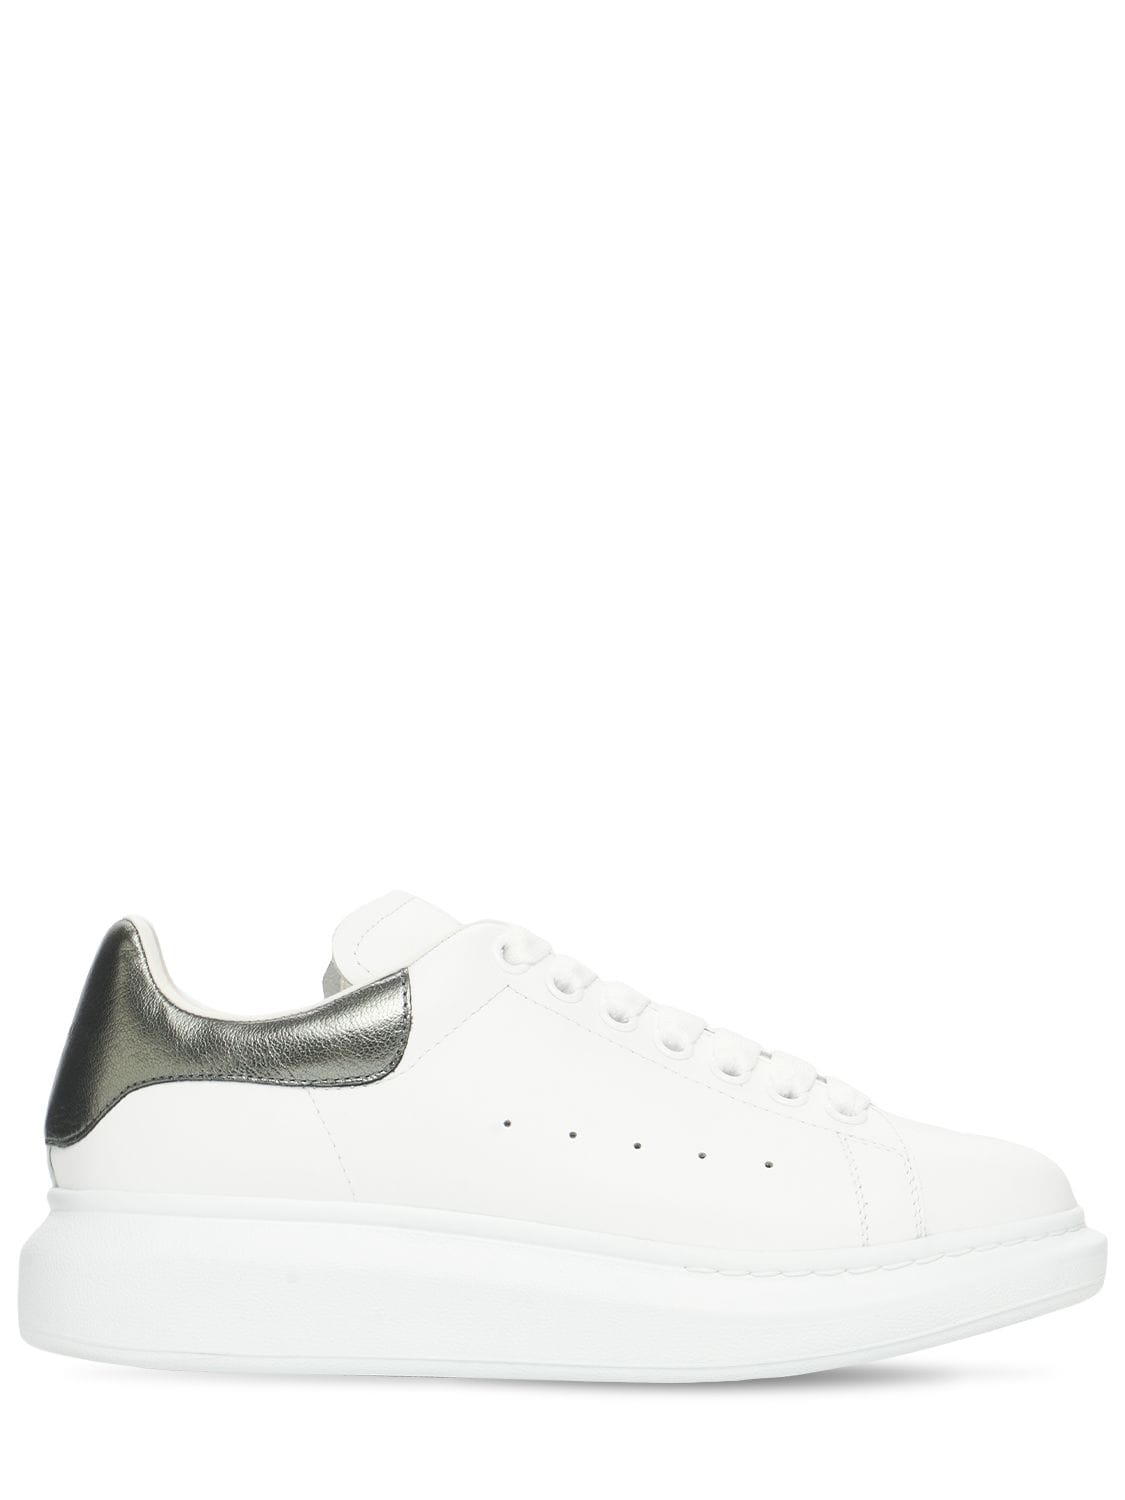 Image of 45mm Leather Sneakers W/ Metallic Detail